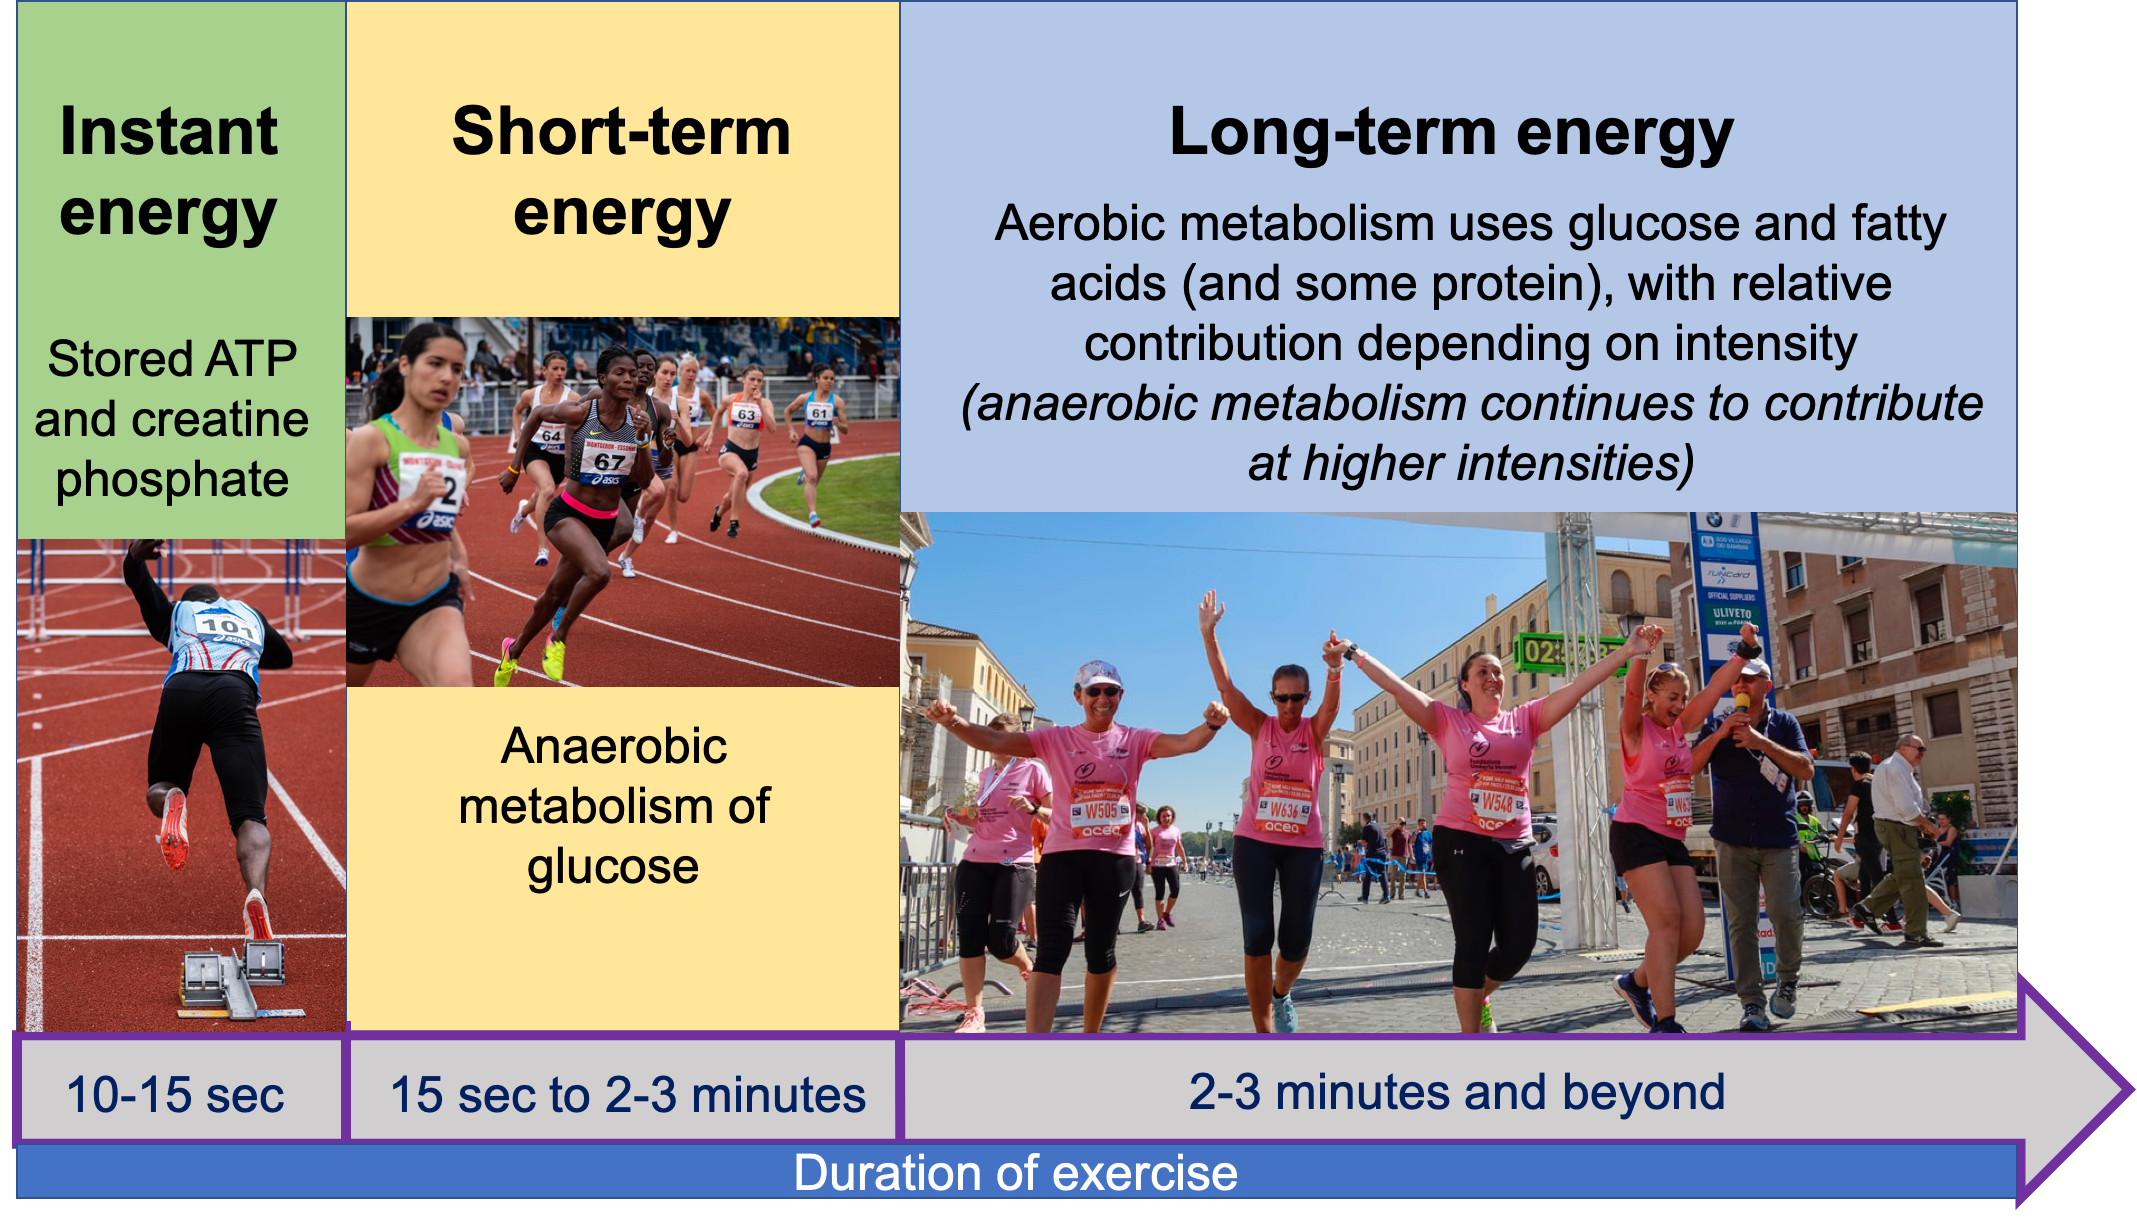 The image shows 3 main energy systems used to fuel exercise and how they change with duration of exercise. The left panel shows instant energy coming from stored ATP and creatine phosphate for the first 10-15 seconds of exercise, illustrated with a photo of a man leaving the starting blocks on a track. The middle panel shows short-term energy coming from anaerobic metabolism of glucose, fueling 15 seconds to 2-3 minutes of exercise, illustrated by a photo of women rounding the track during a race. The right panel shows long-term energy fueled by aerobic metabolism of glucose, fatty acids, and protein, with relative contribution depending on intensity and with anaerobic metabolism continuing to contribute at higher intensities. This panel is illustrated by a group of women crossing the finish line at a half marathon.